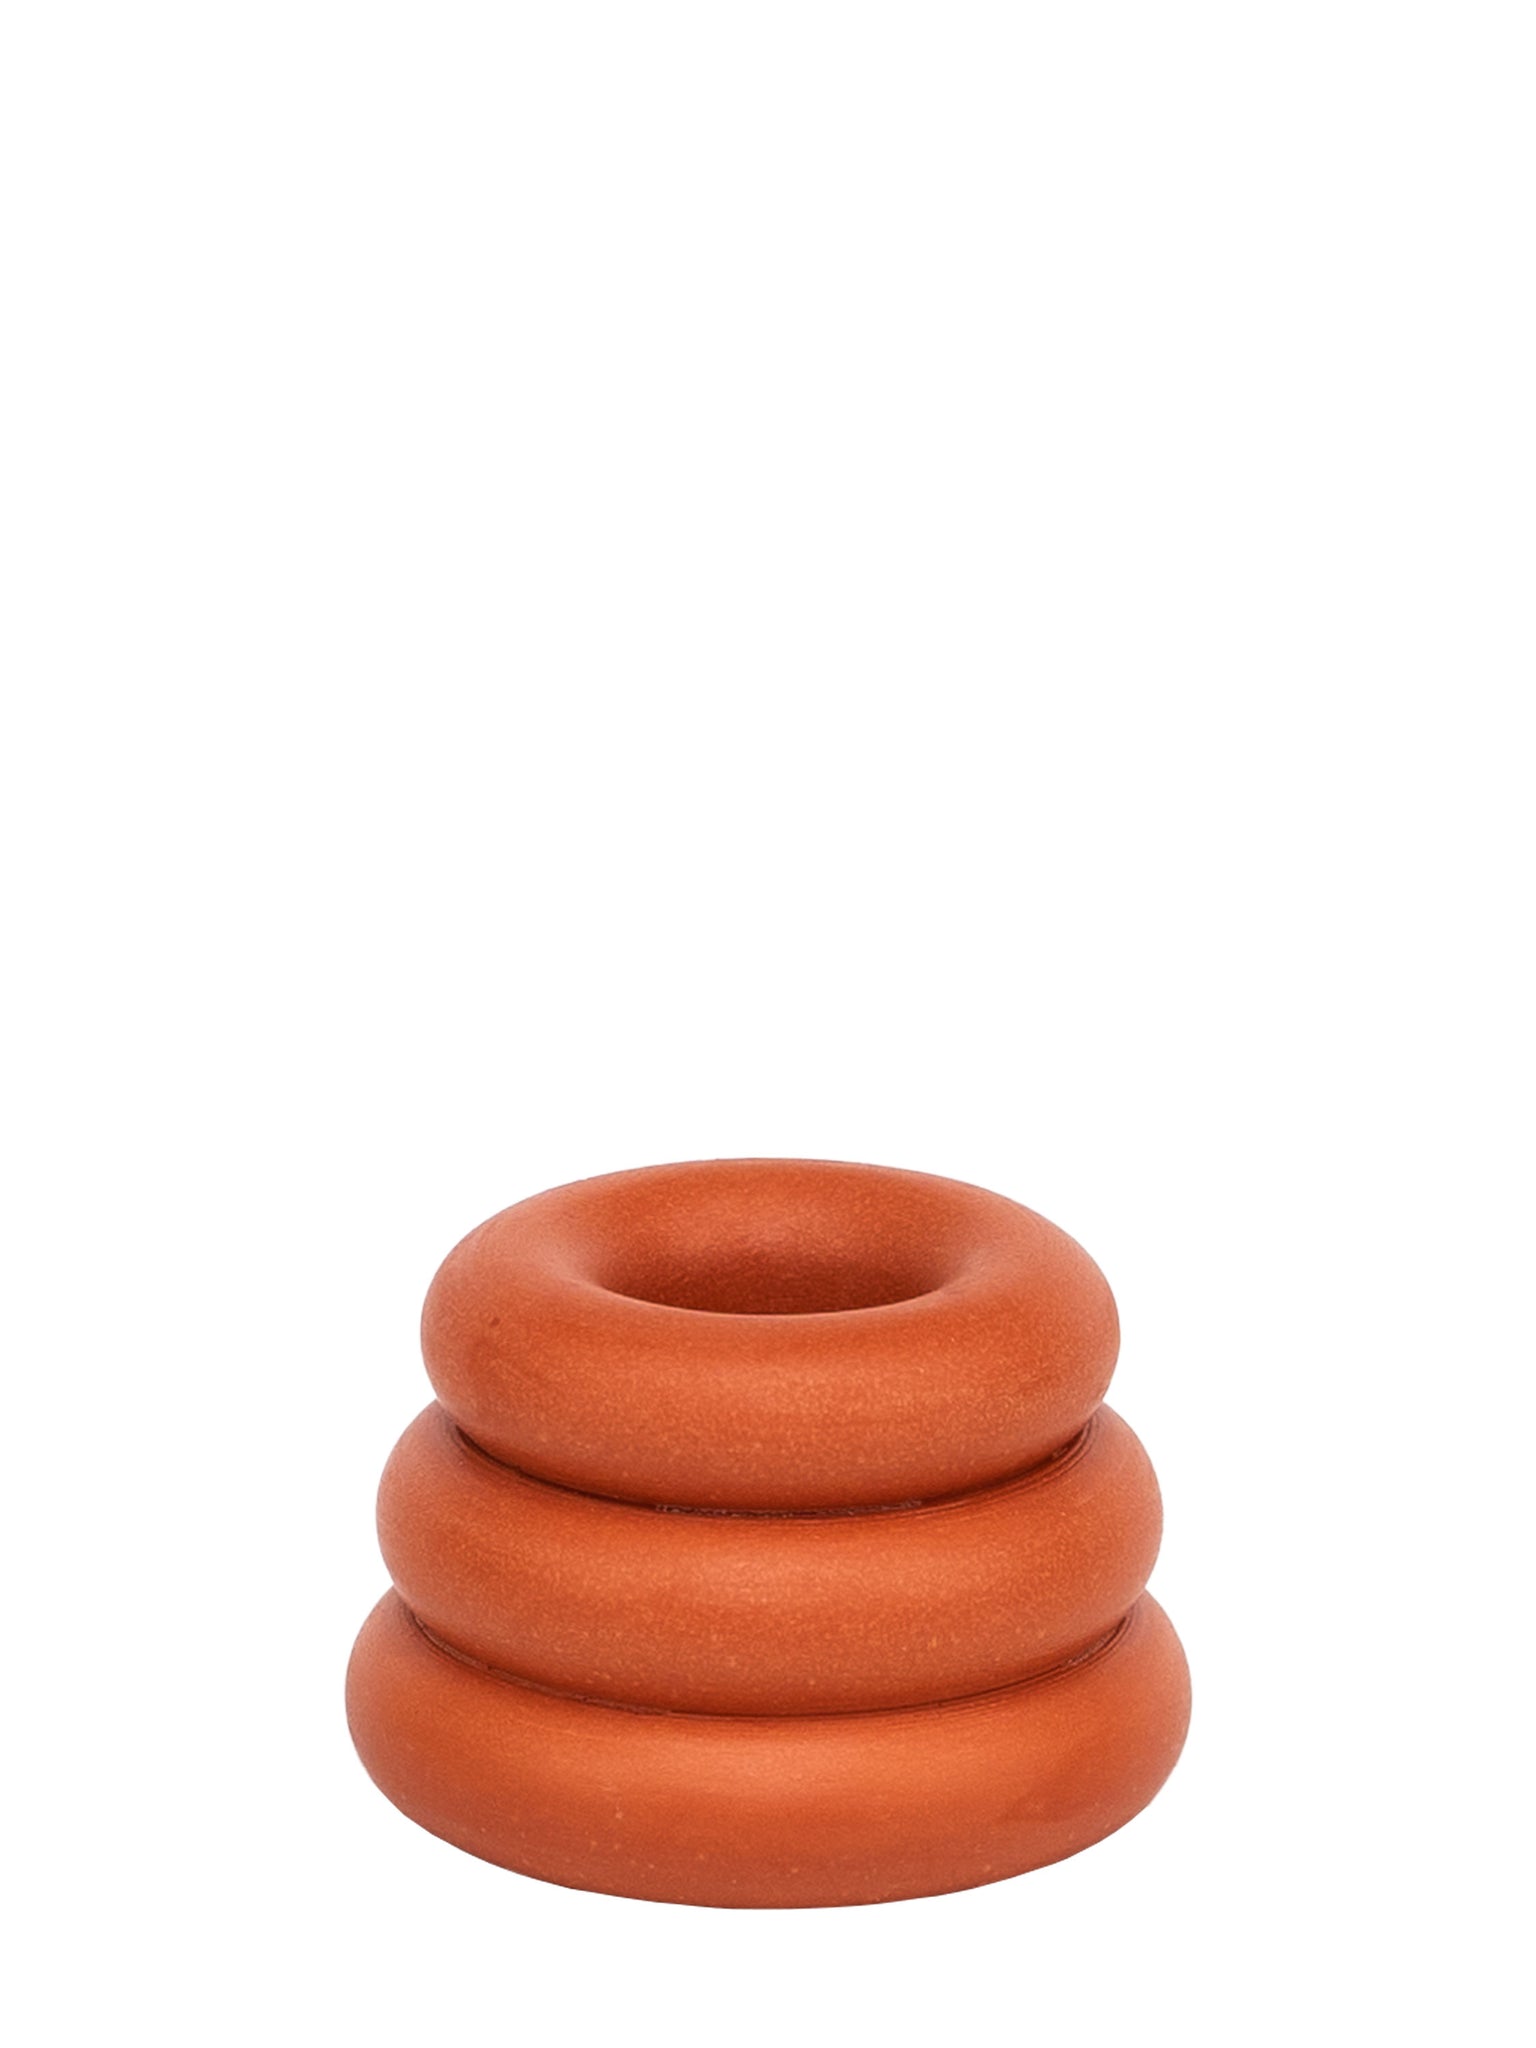 Terracotta Jesmonite Candleholder by Yod and Co